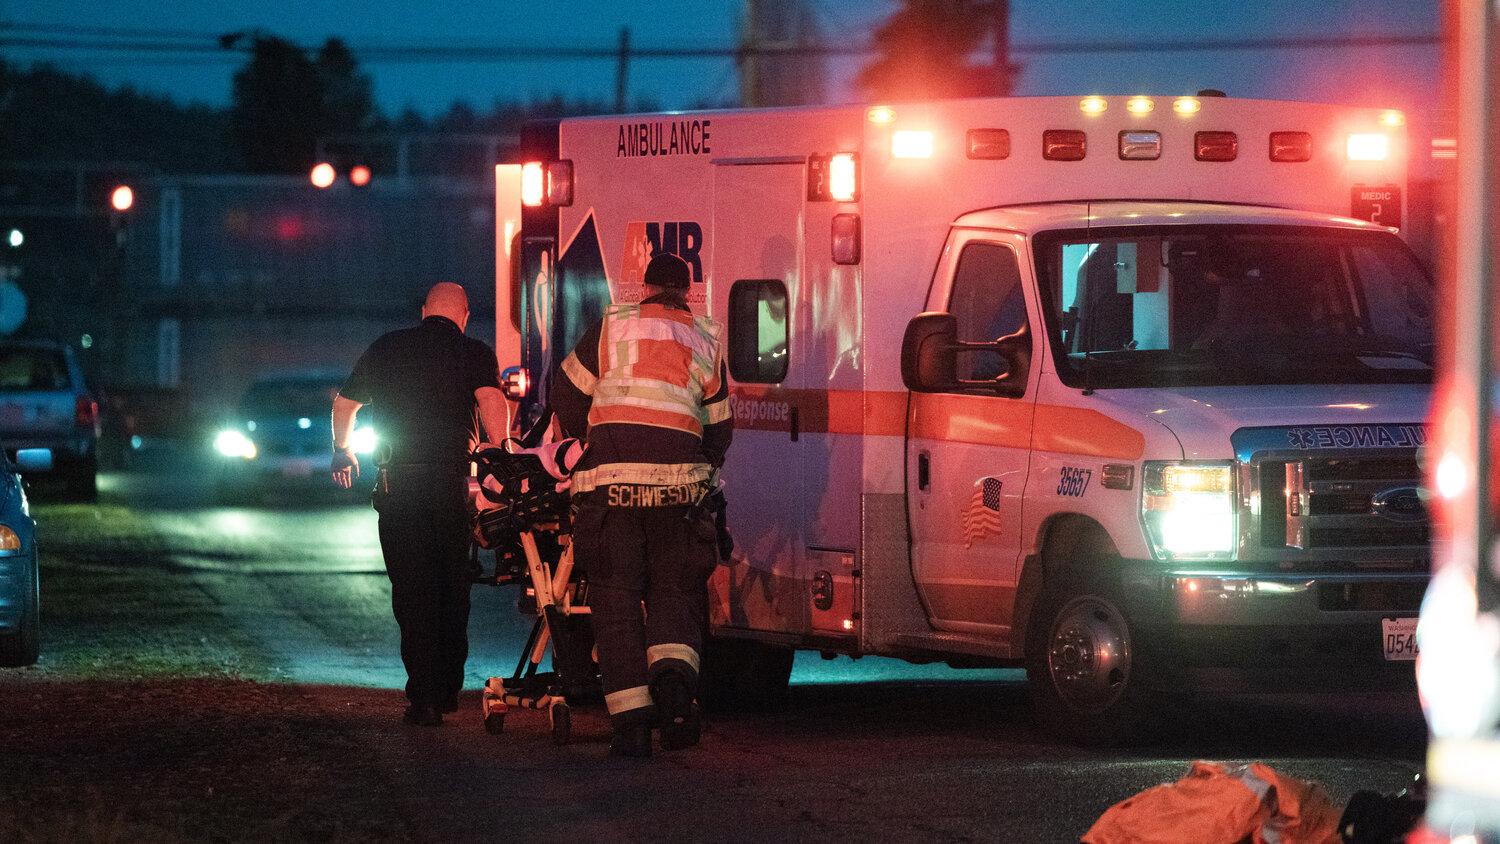 A paramedic and firefighter transport a man on a gurney following a hit-and-run in Centralia on Friday, Nov. 24, at the intersection of South Pearl Street and West Summa Street. It occurred just after 4:50 p.m. According to Centralia police call logs, witnesses called 911 after observing a pedestrian get struck by a red vehicle while crossing the street. The driver of the vehicle fled the scene in the car that was later located and seized as evidence by law enforcement. The pedestrian was airlifted to a hospital and is believed to be in critical condition. The case is still under investigation.